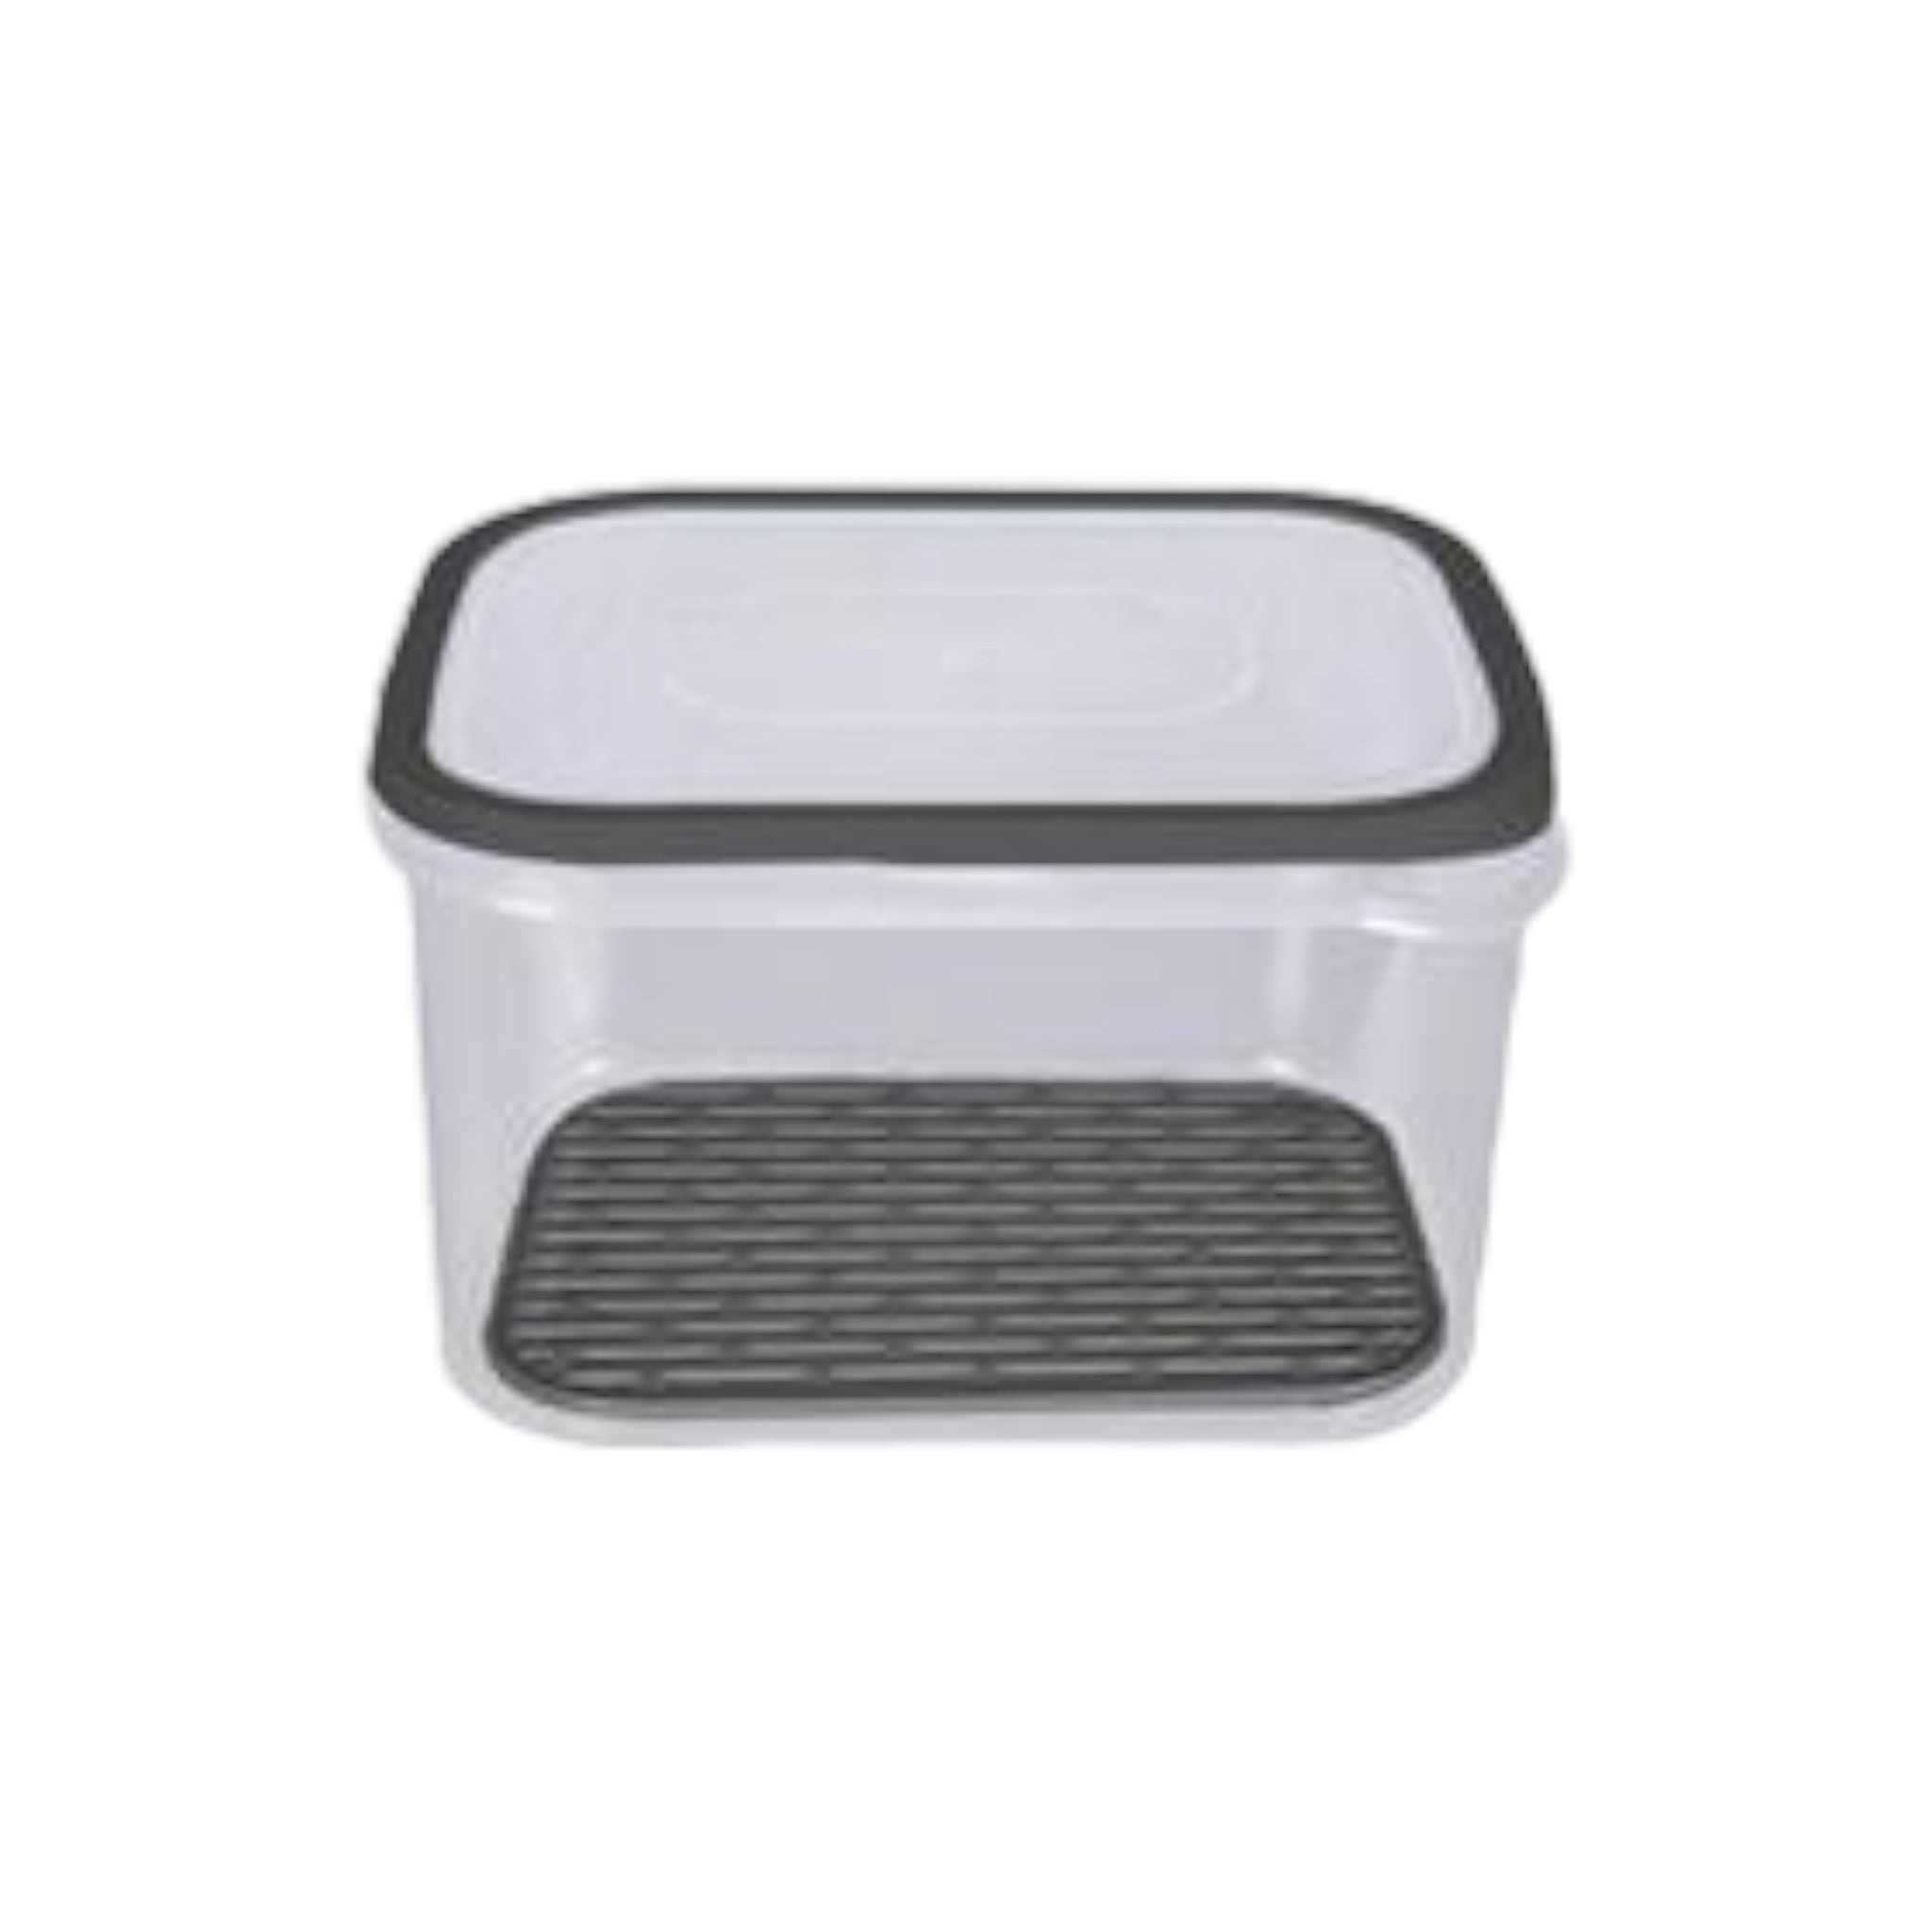 Fresh Food Storage Container with Strainer 16x12x10cm